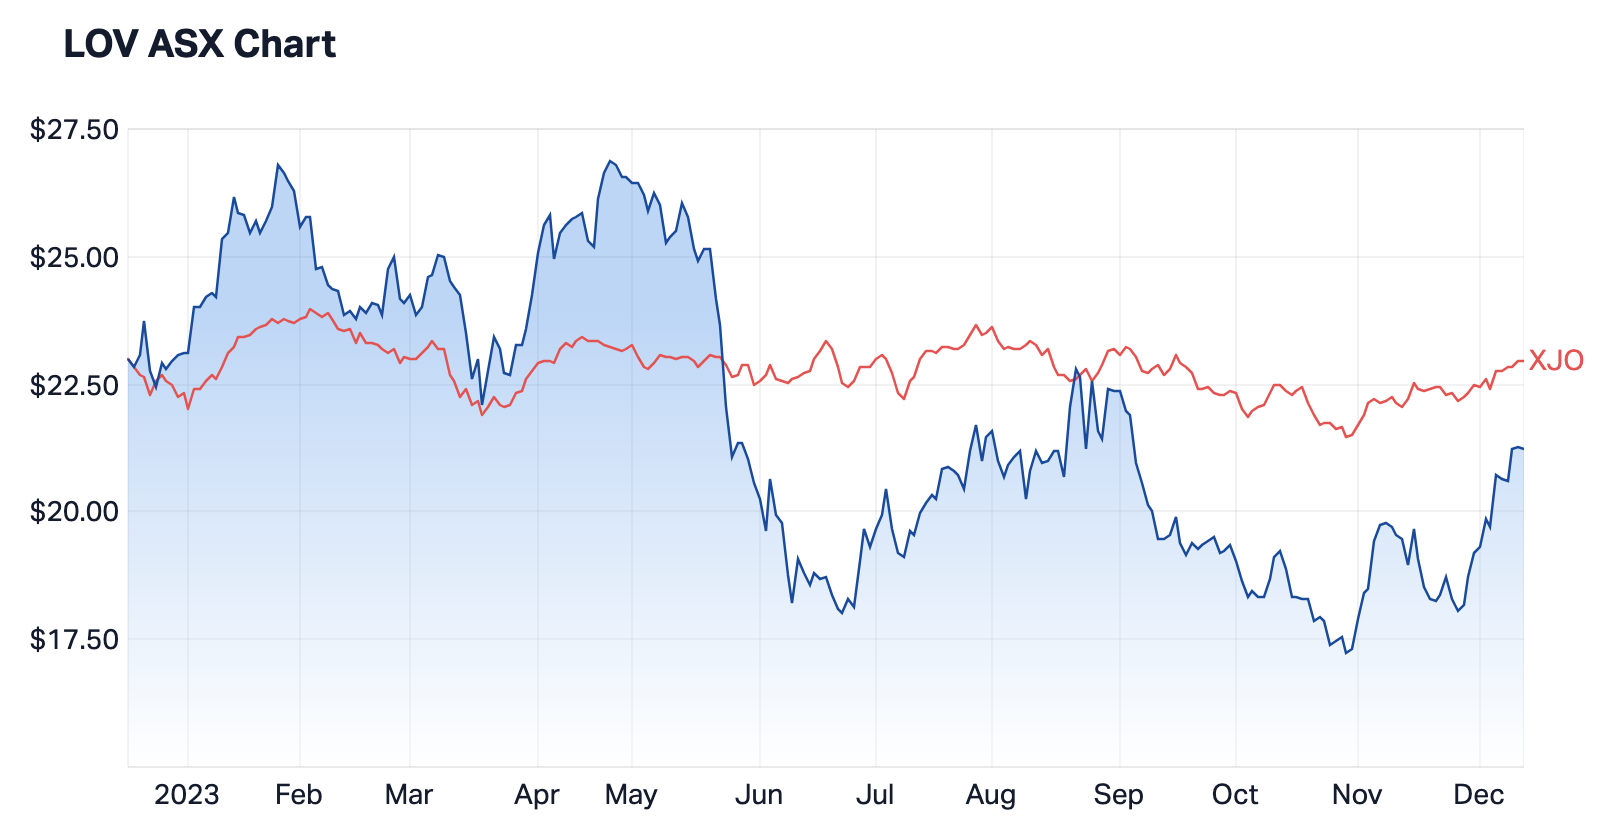 LOV shares versus the ASX 200 (as shown in red). Source: Market Index